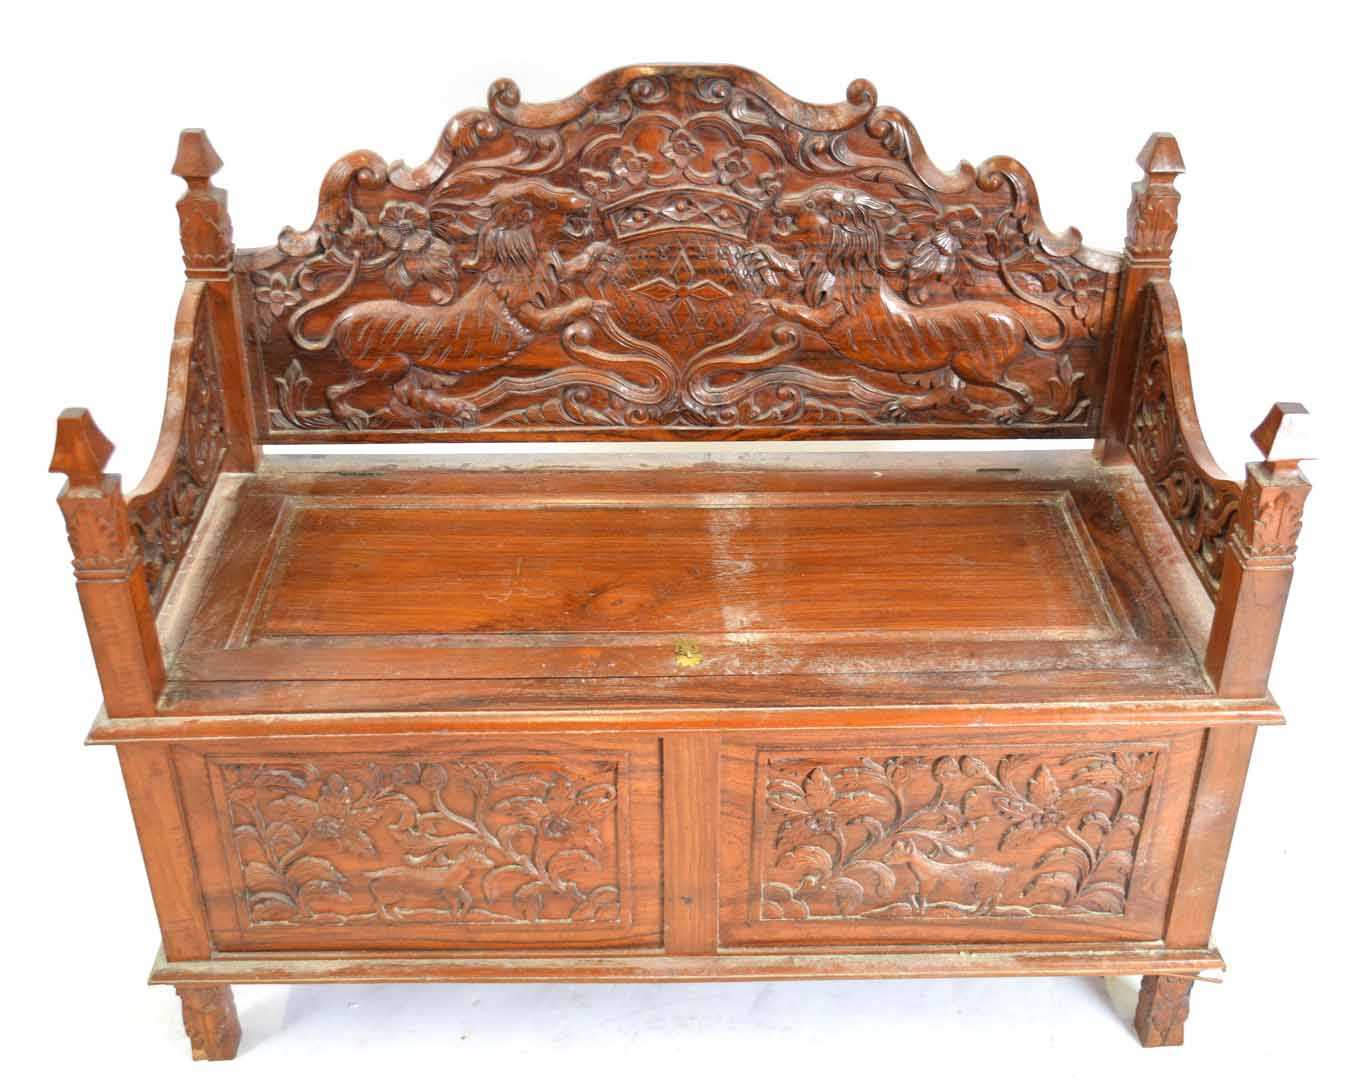 20th century Far Eastern hardwood settle, elaborately carved all over with lion and shield detail to